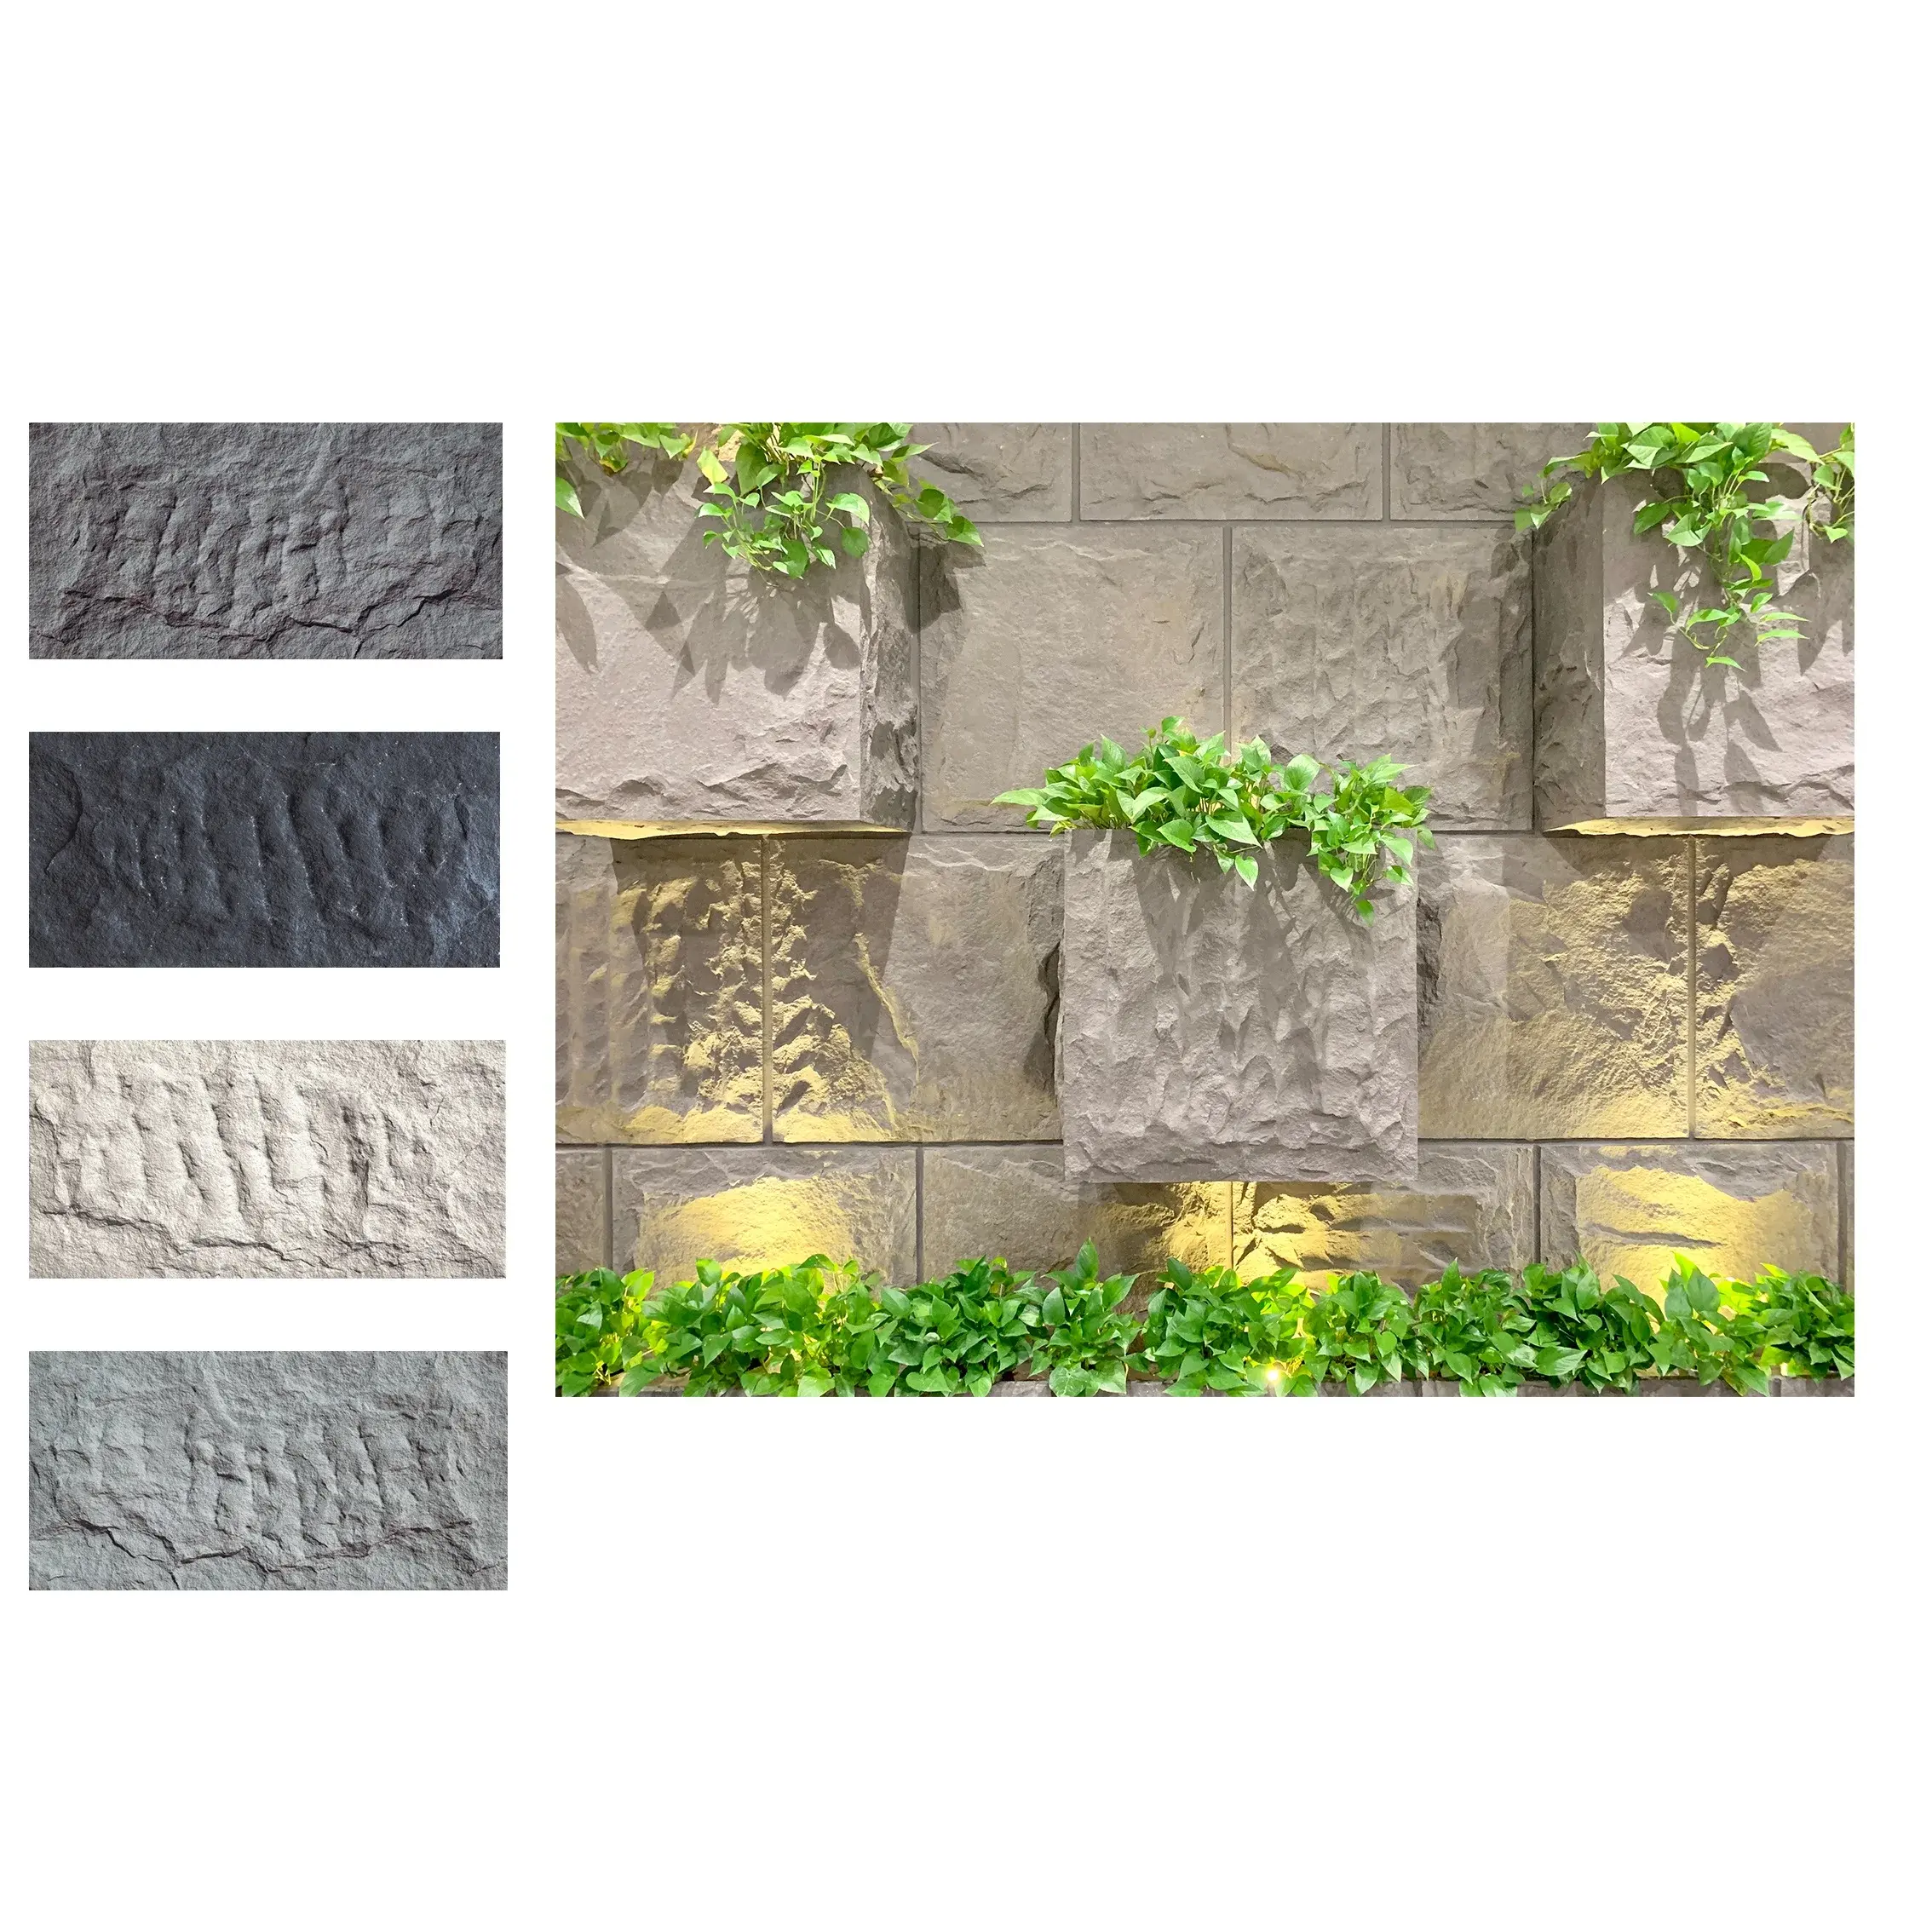 Modified Clay Material best quality line stone Siding Decorative Flexible Wall Panels Exterior Stone